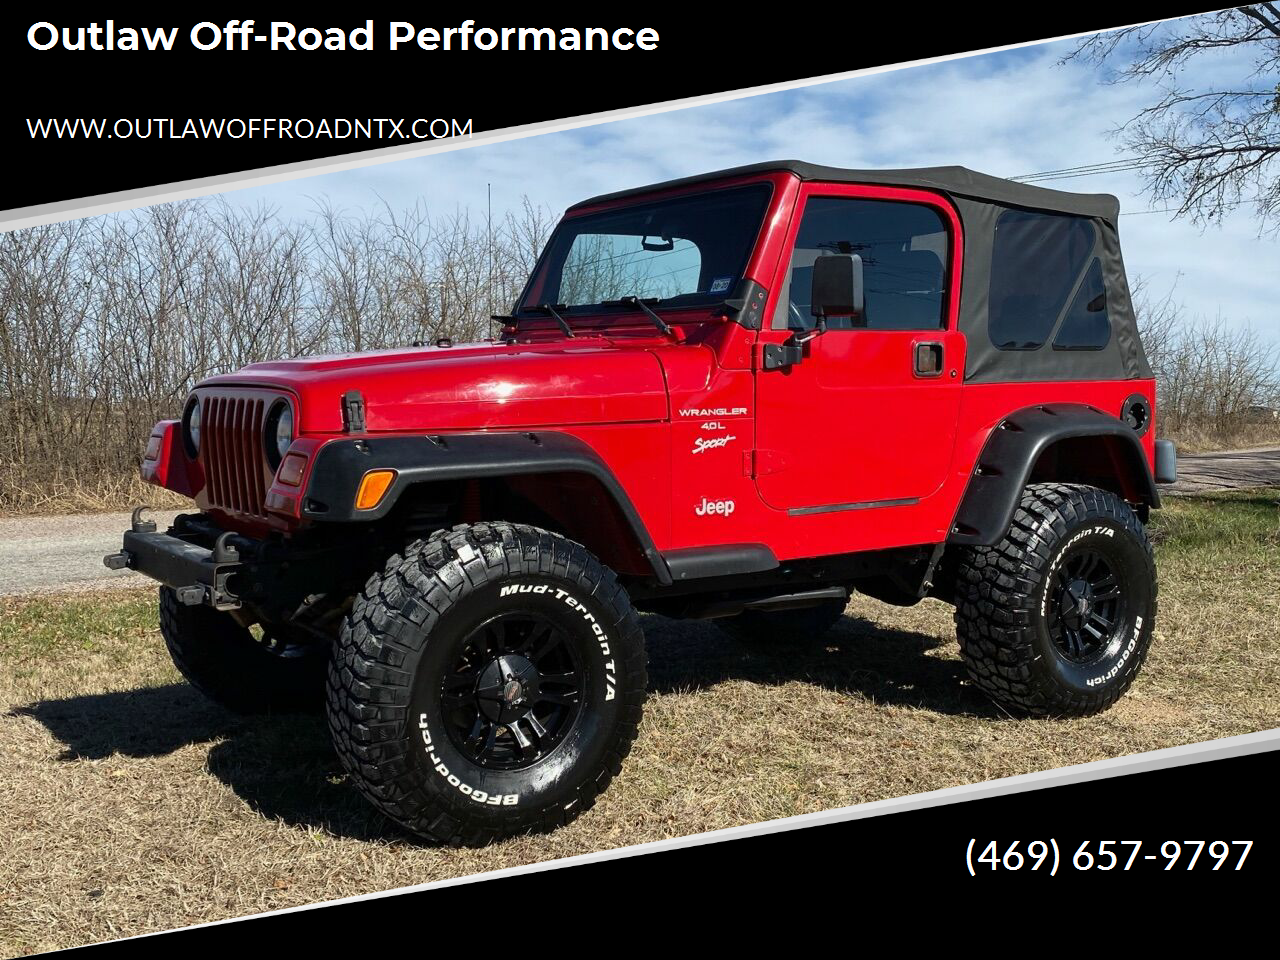 2000 Jeep Wrangler For Sale In Texas ®